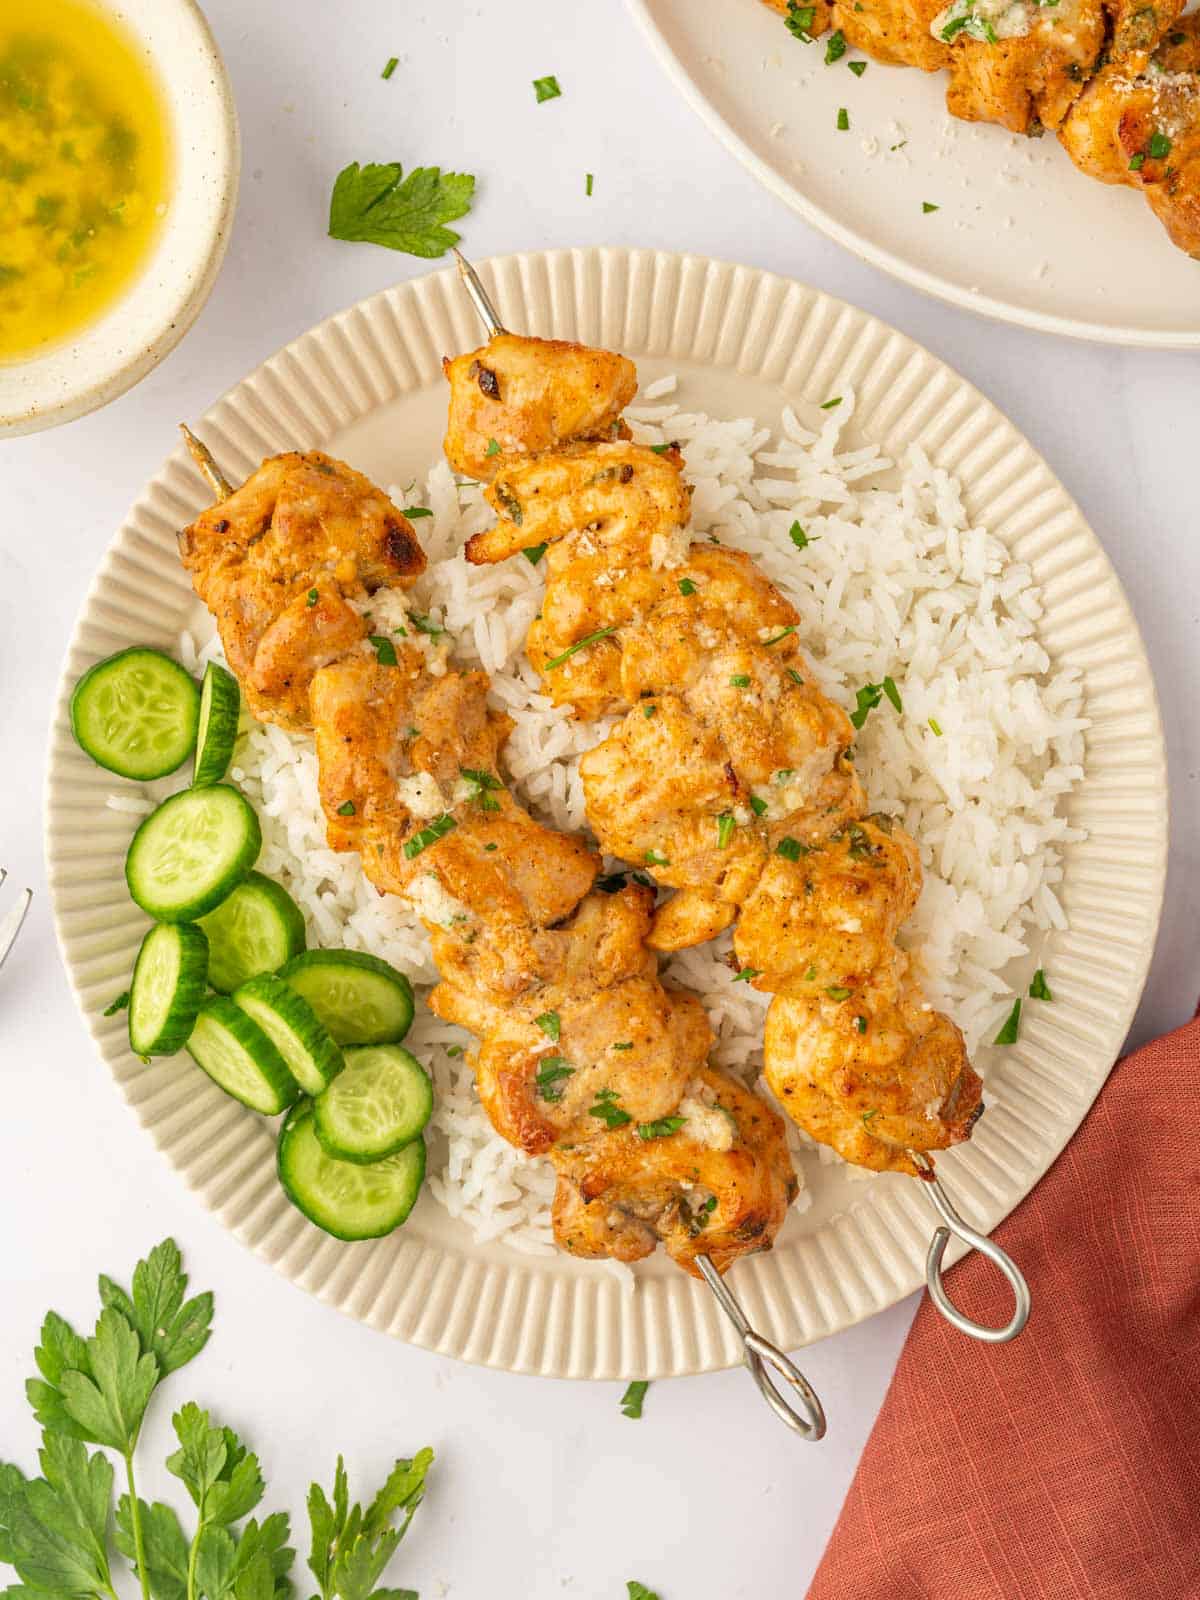 Oven chicken skewers with parmesan butter over rice.